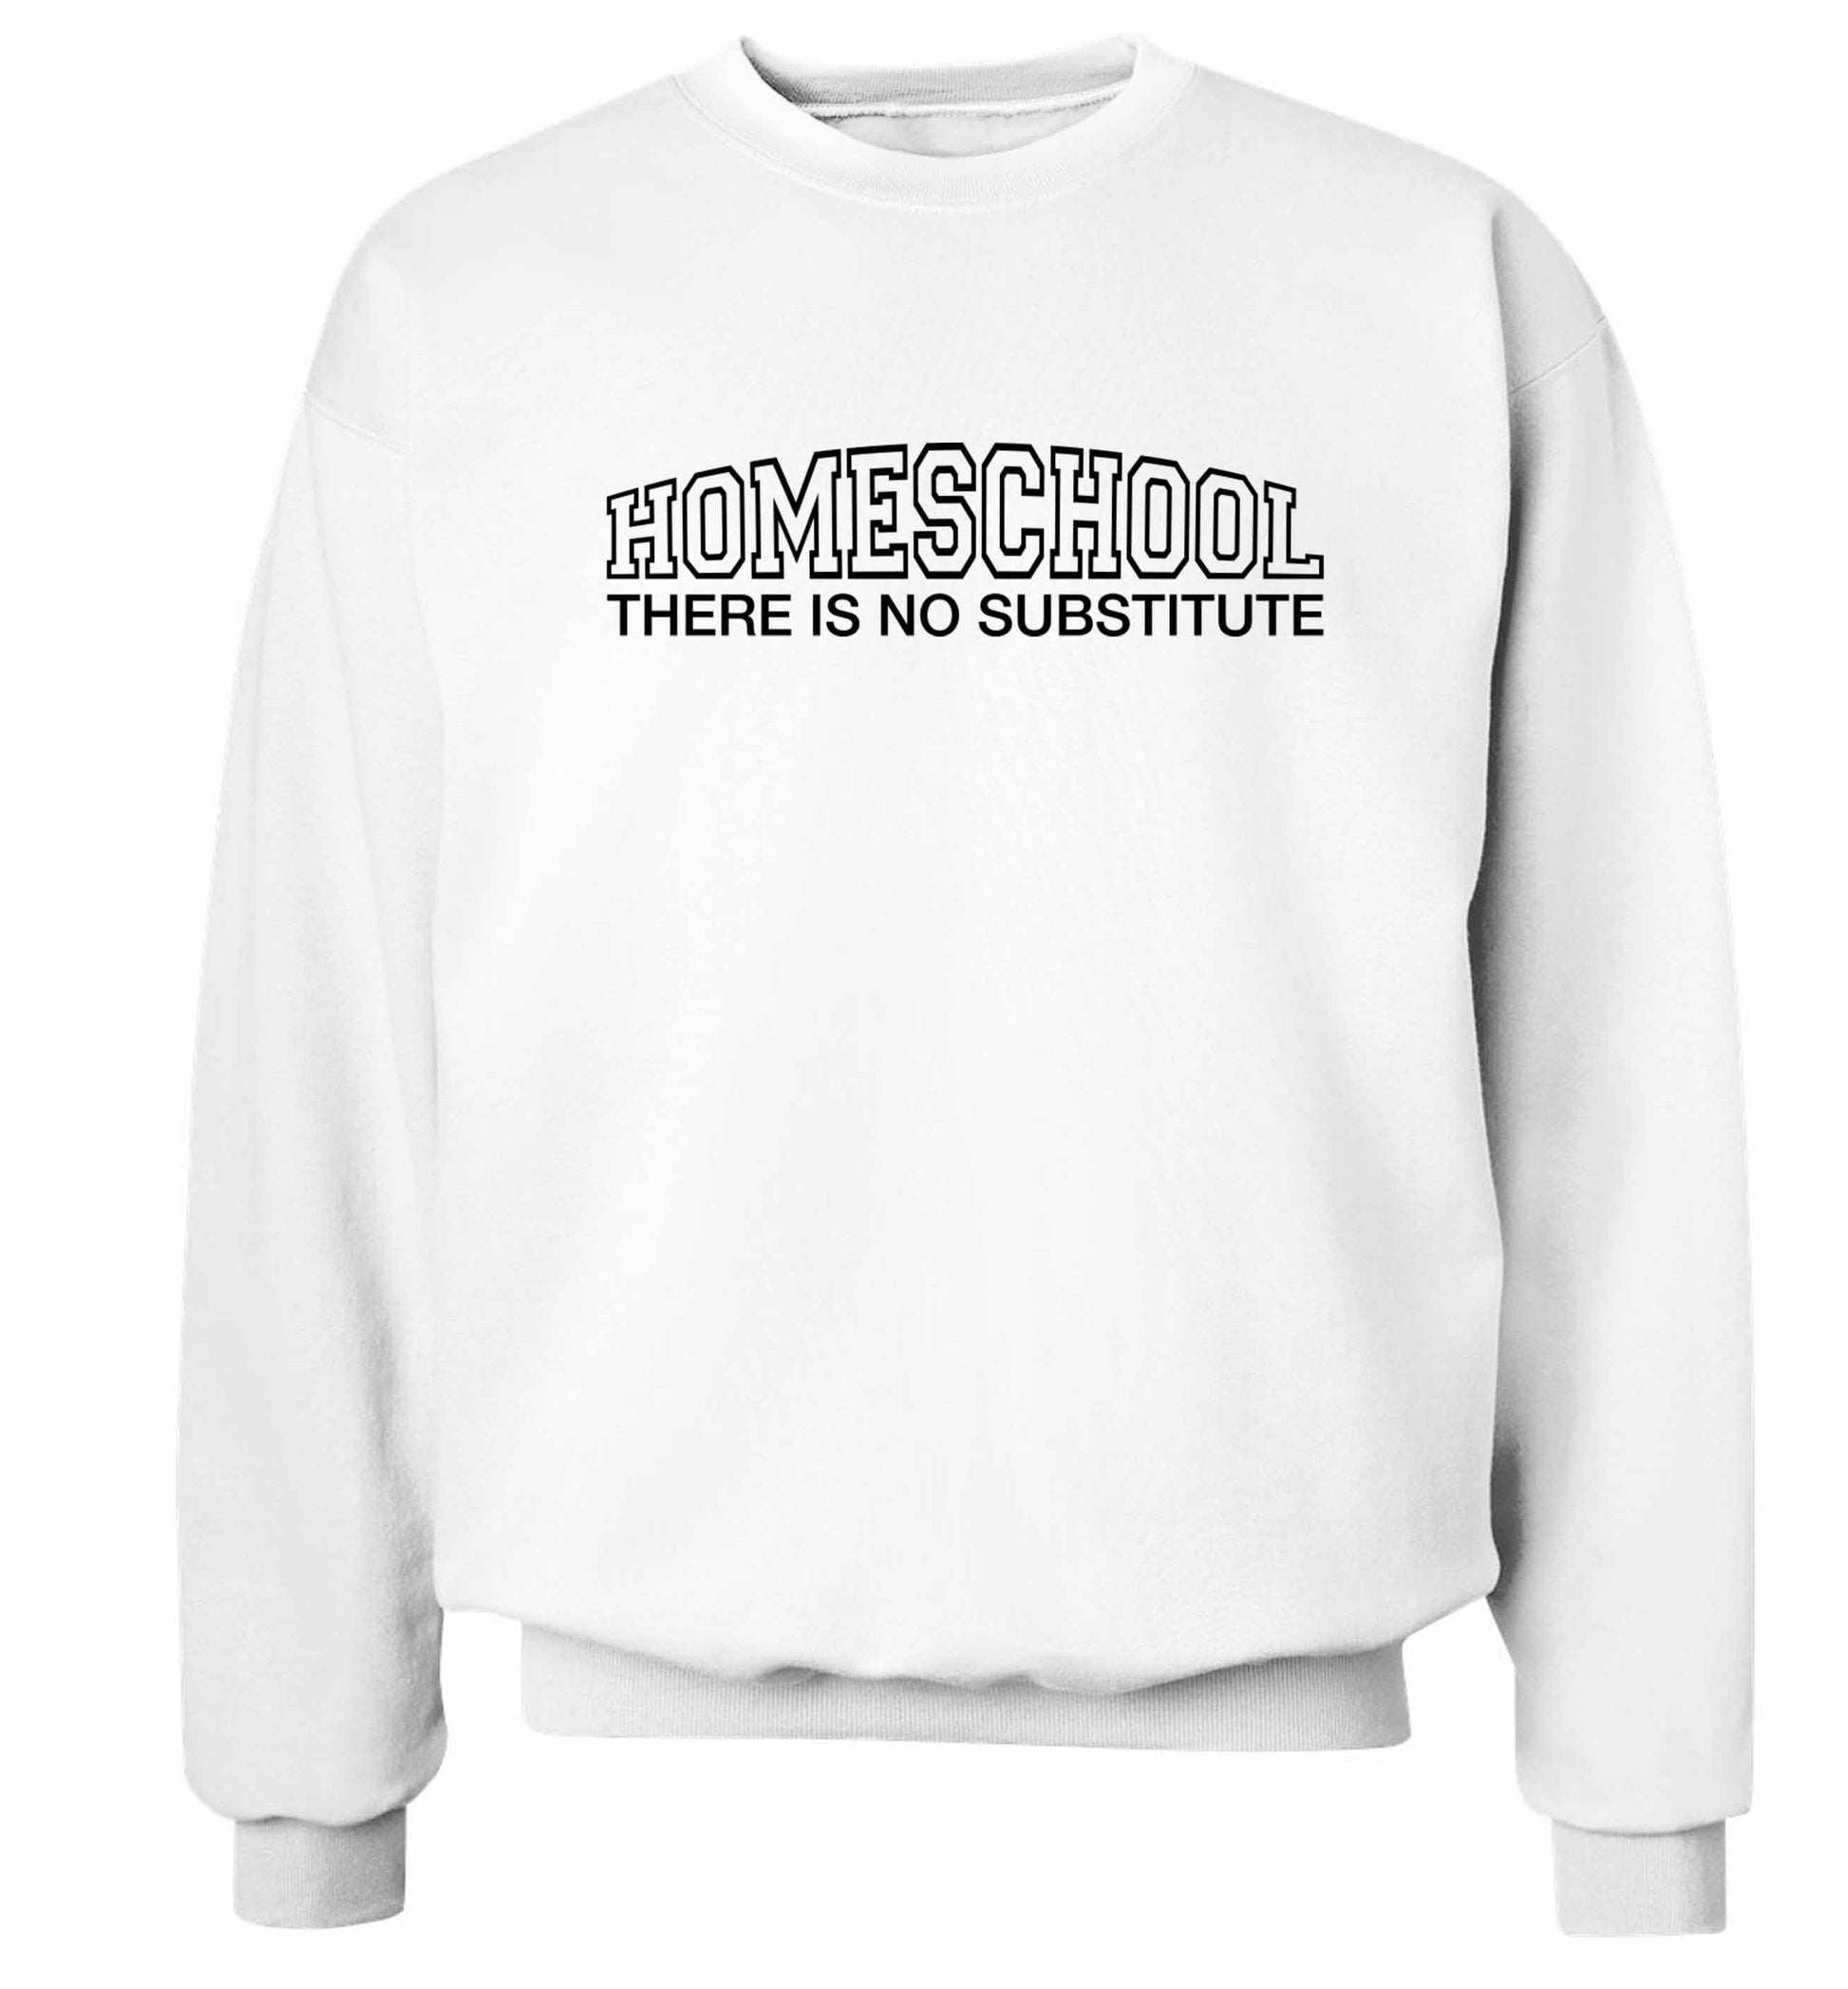 Homeschool there is not substitute Adult's unisex white Sweater 2XL